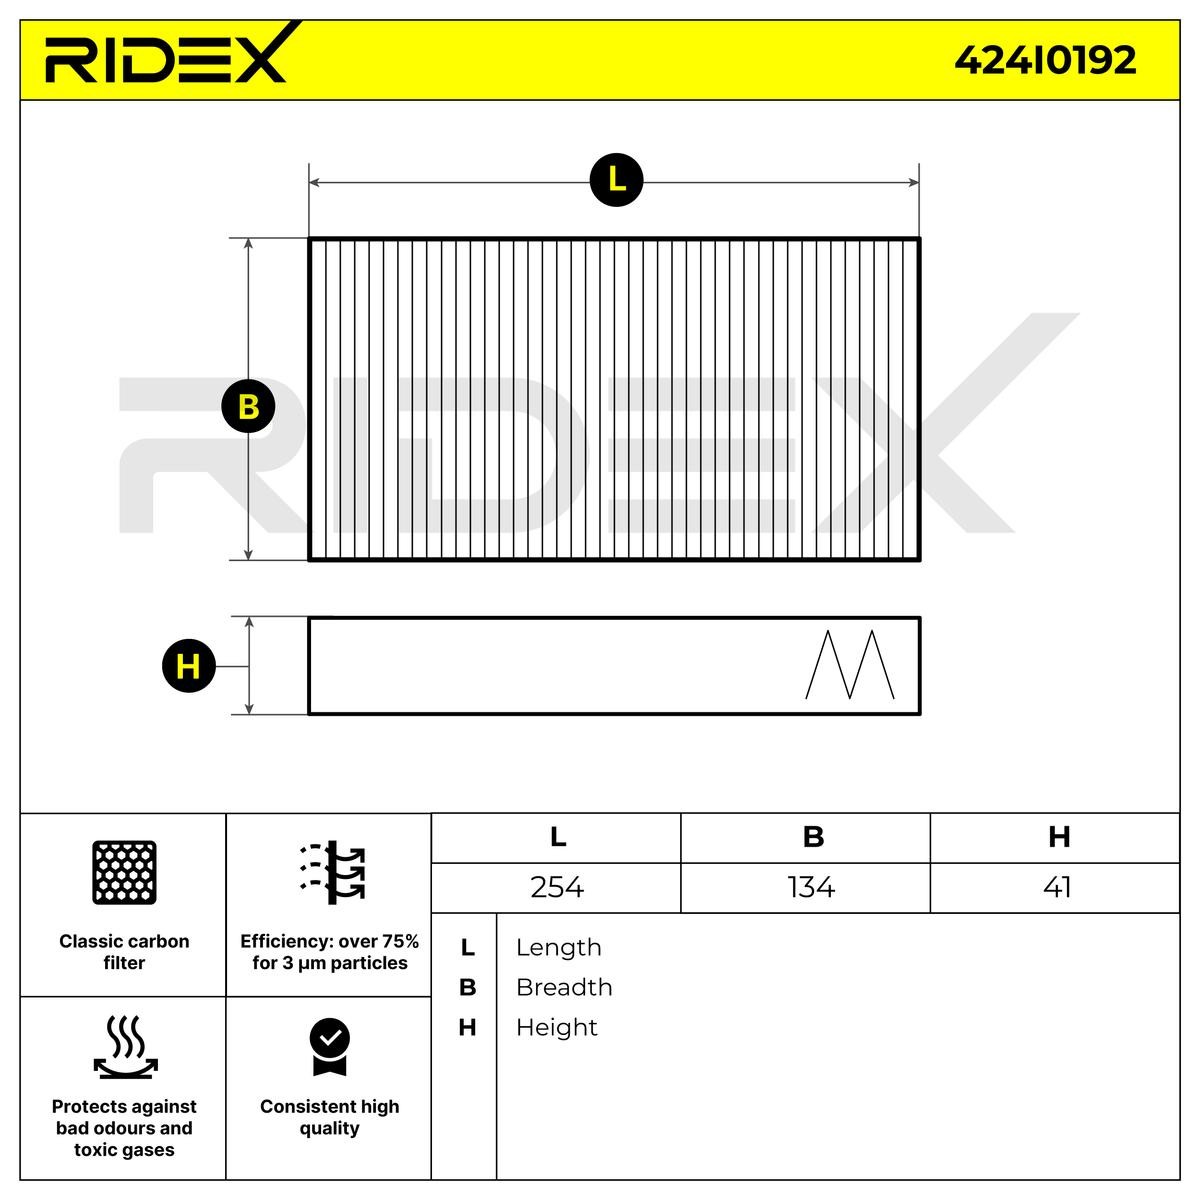 RIDEX Air conditioning filter 424I0192 suitable for MERCEDES-BENZ ML-Class, R-Class, GL